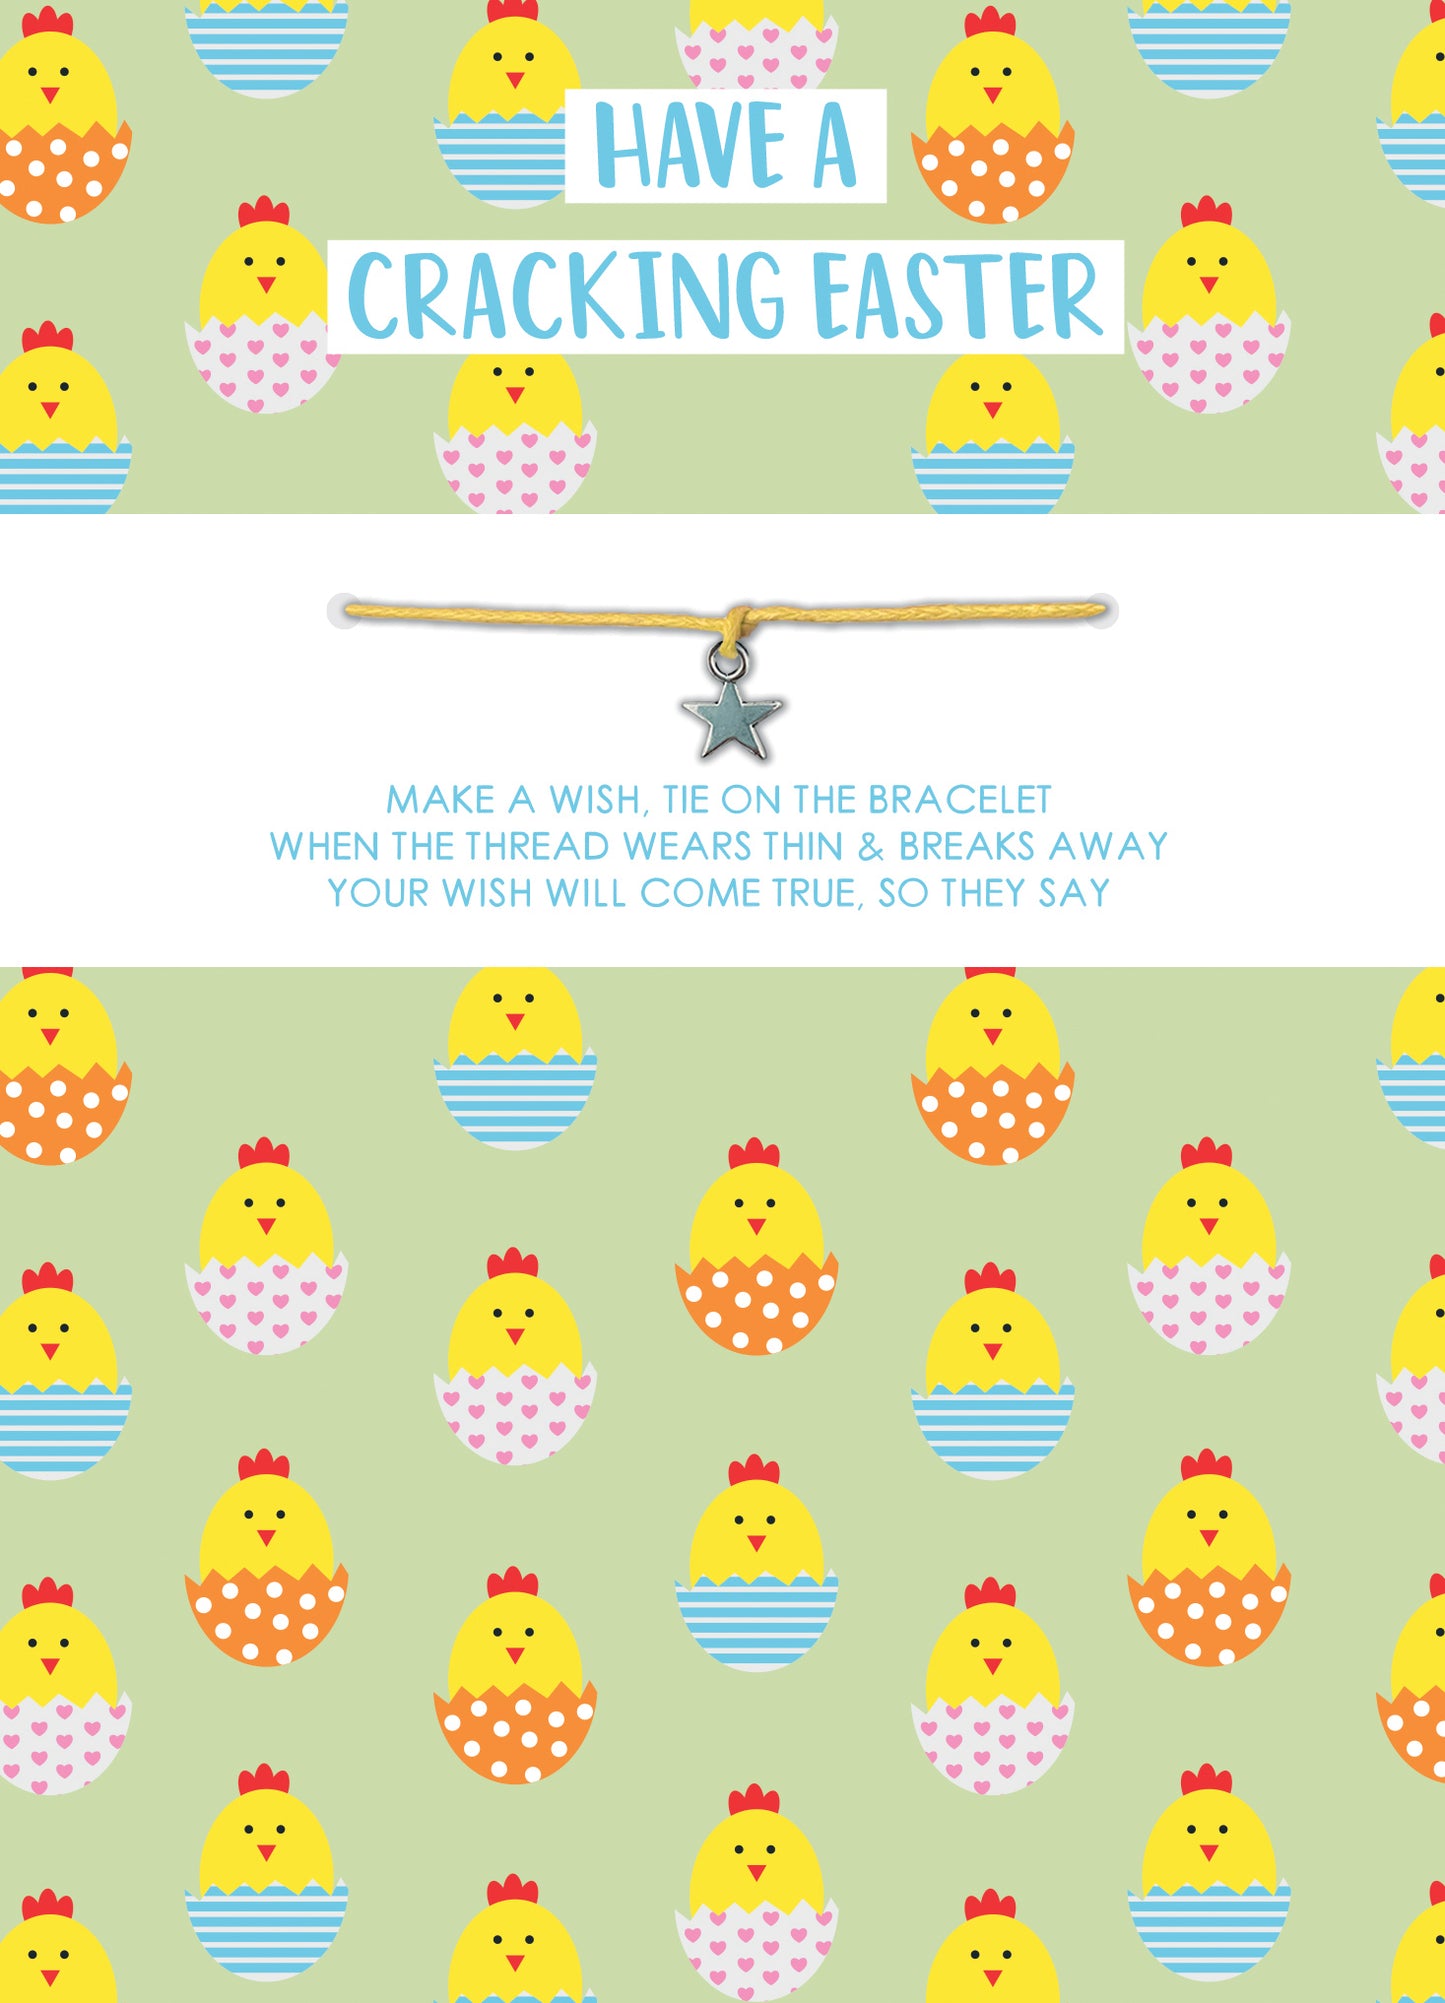 A Cracking Easter Bracelet Chick-Tastic Fun Easter Card & Gift Greeting Card